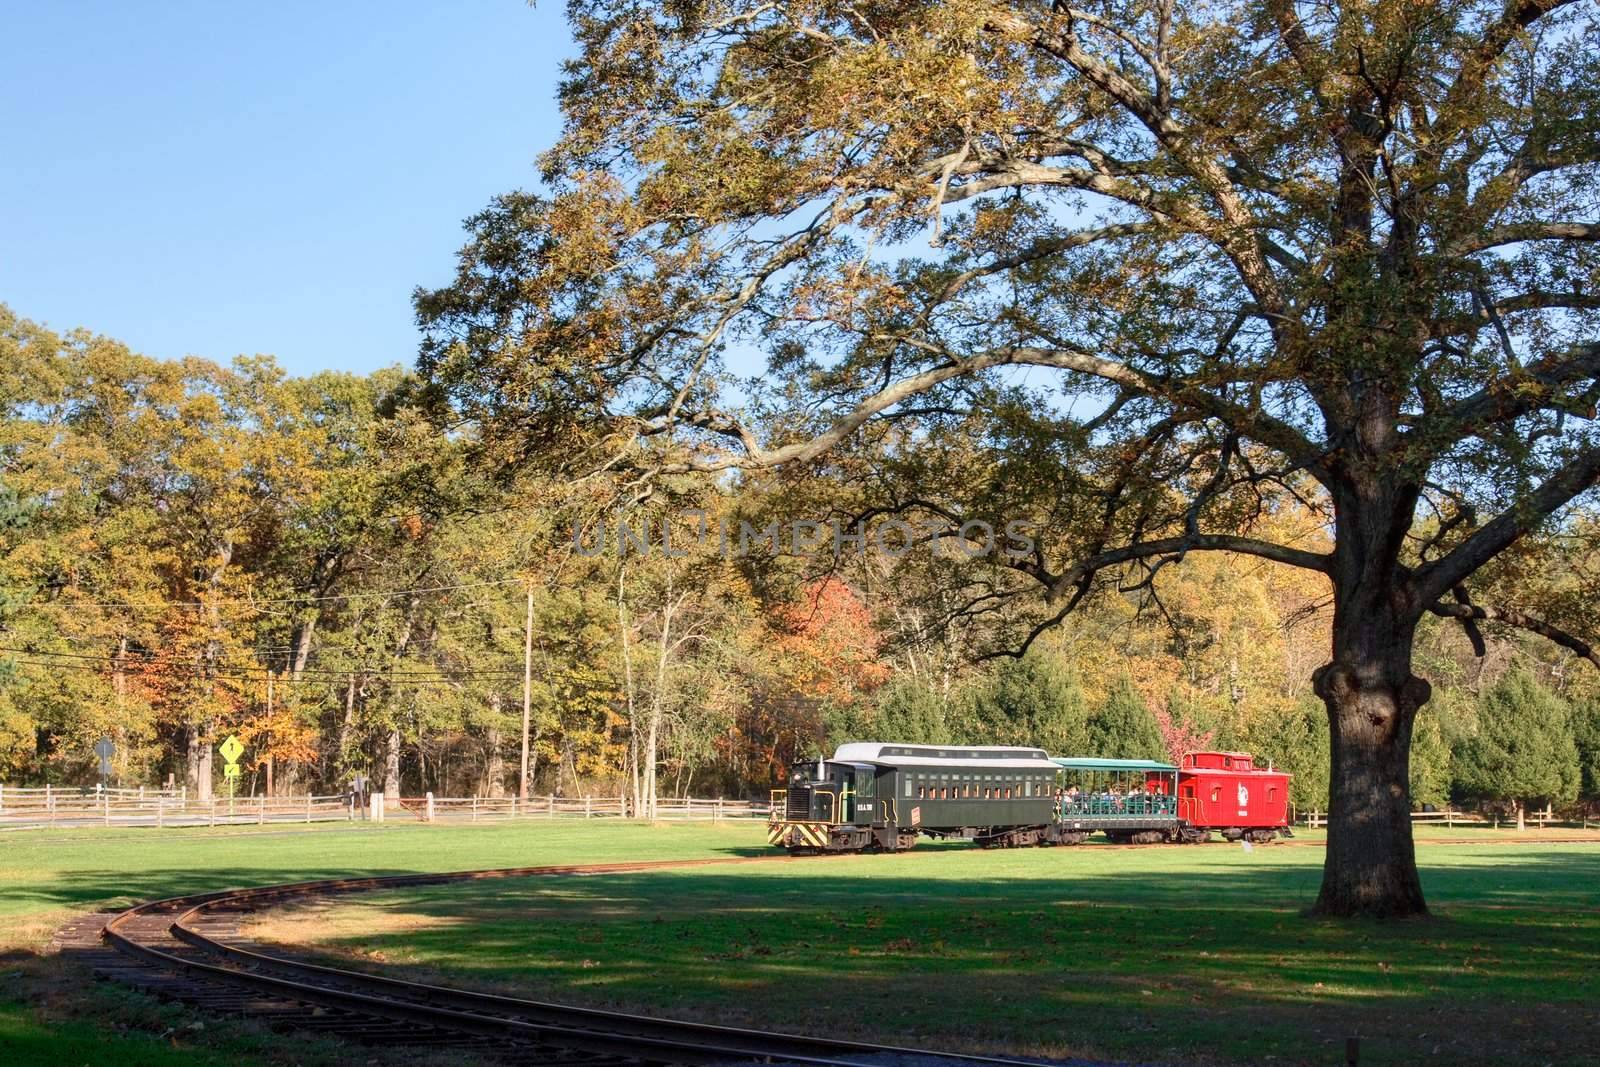 An old, restored train taking people for rides at Allaire Park in New Jersey